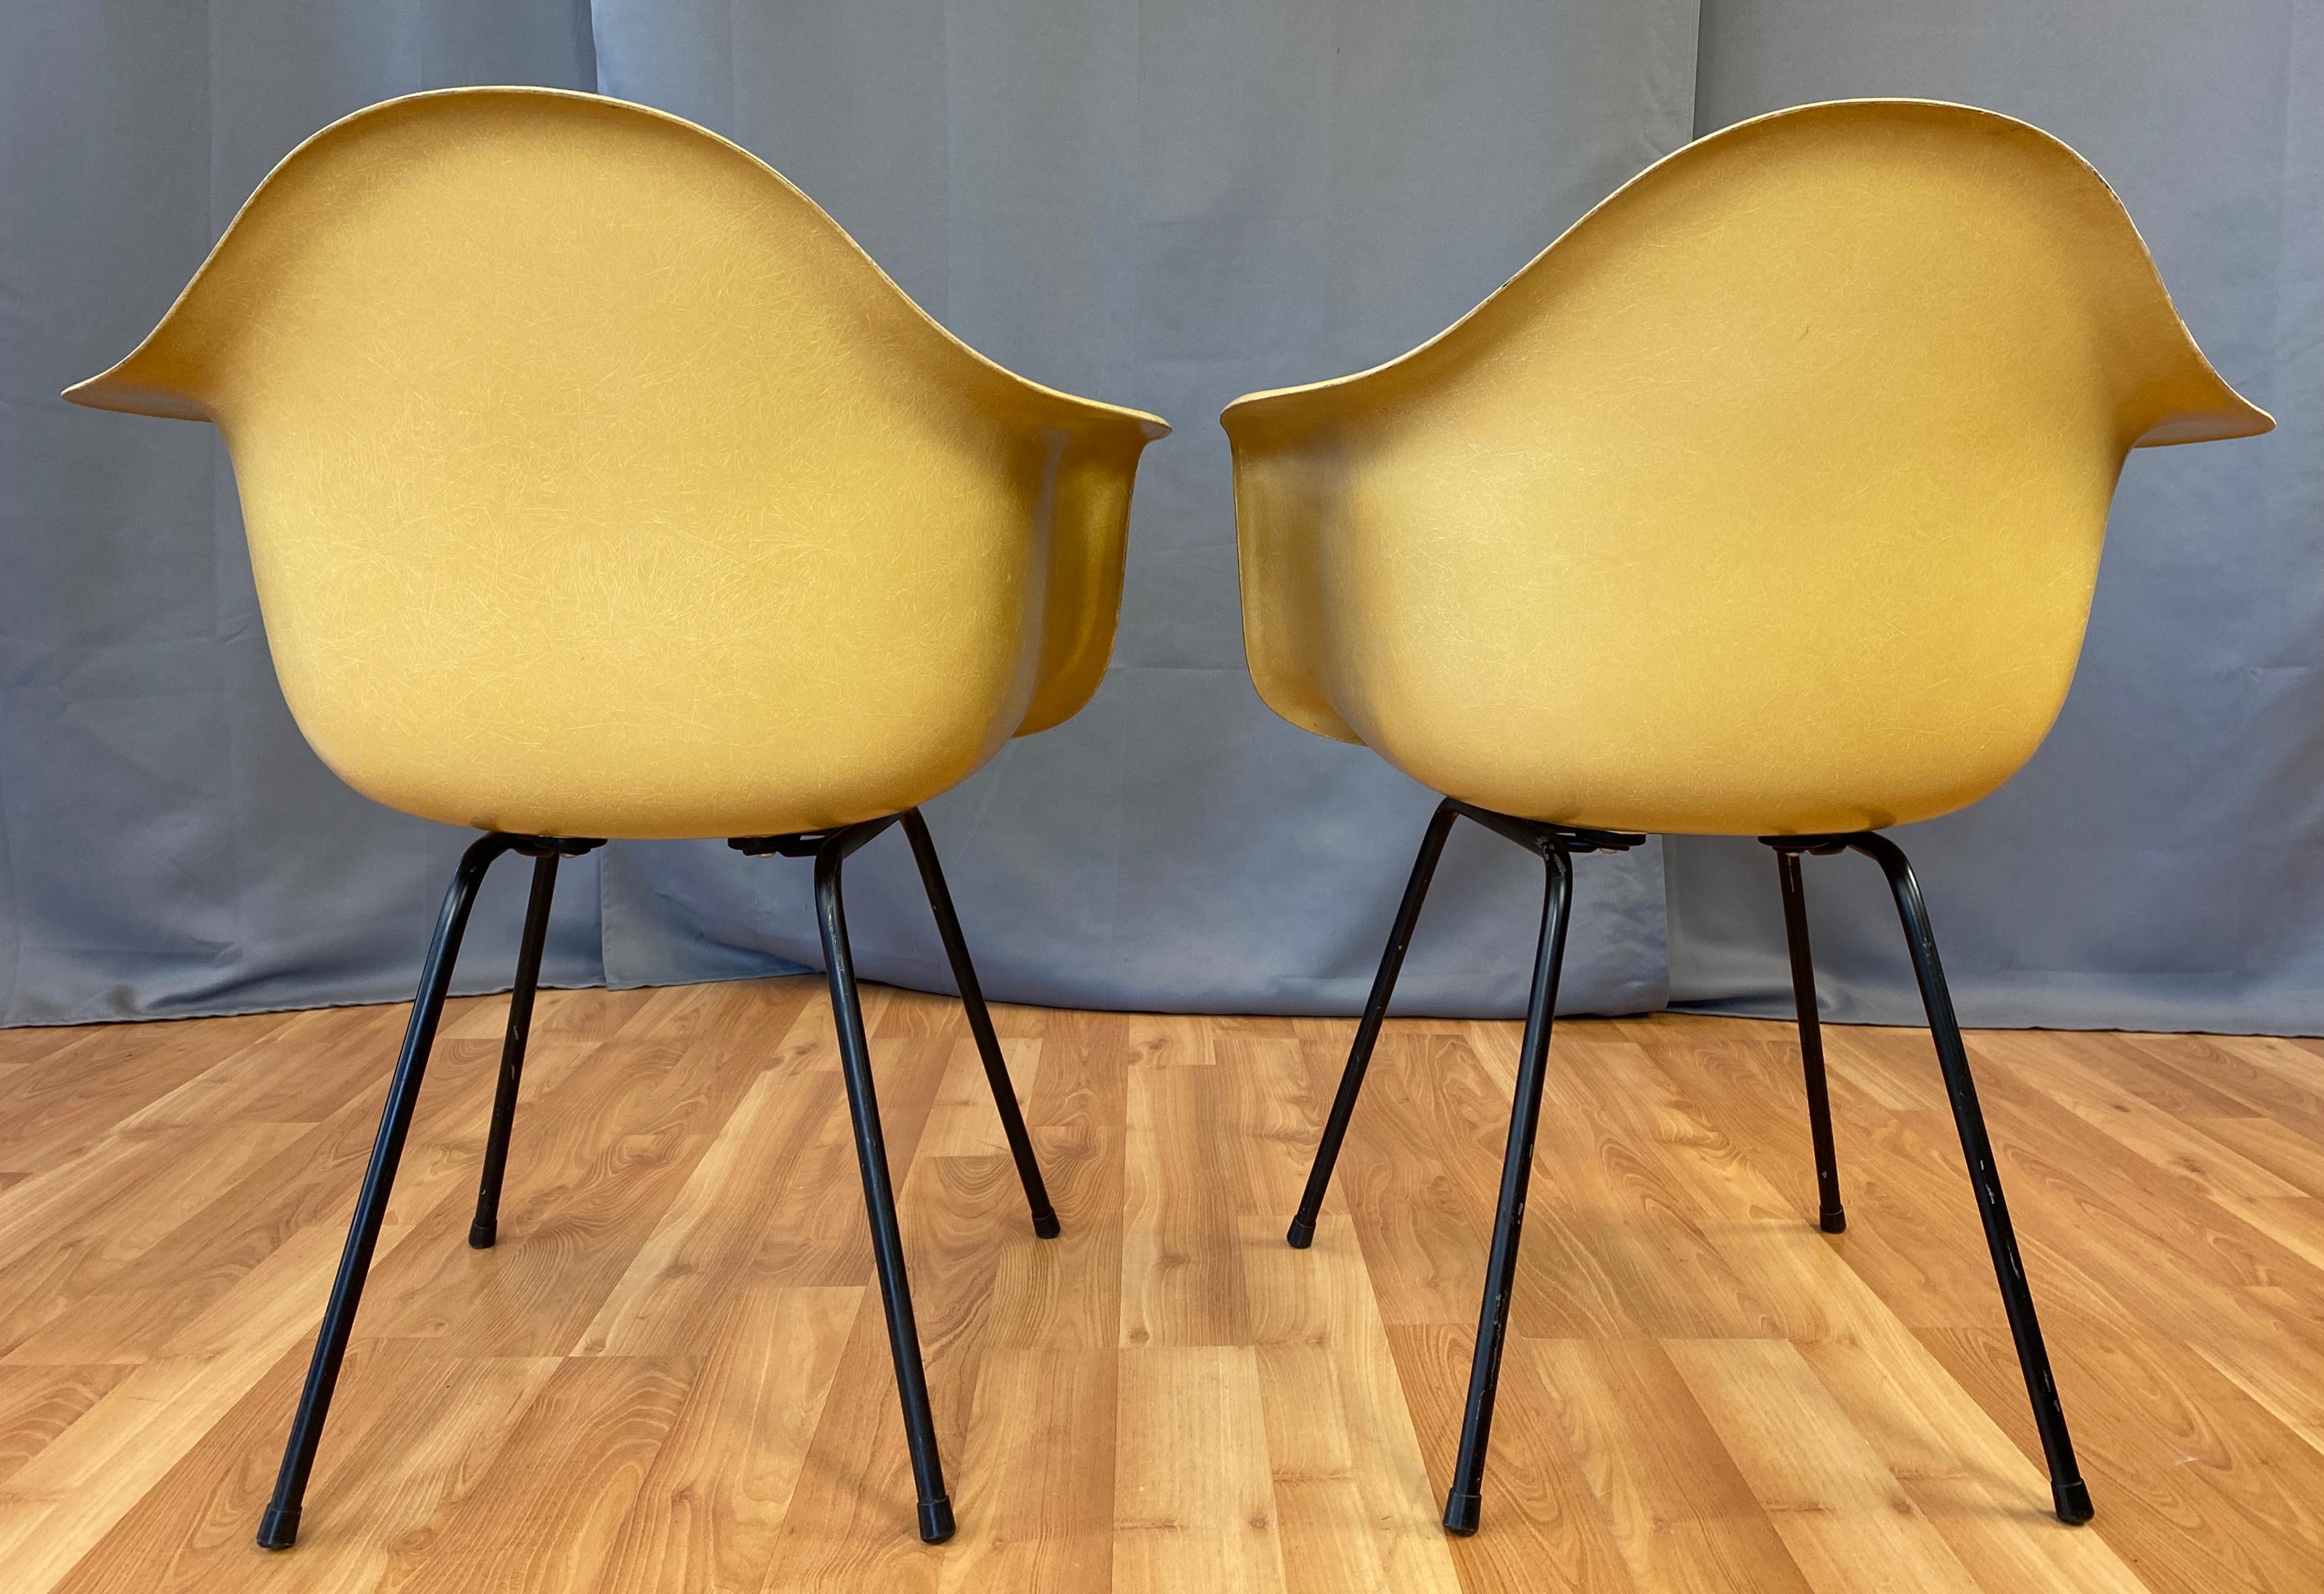 Mid-20th Century Pair of circa 1960s Charles Eames Fiberglass Shell Armchair for Herman Miller